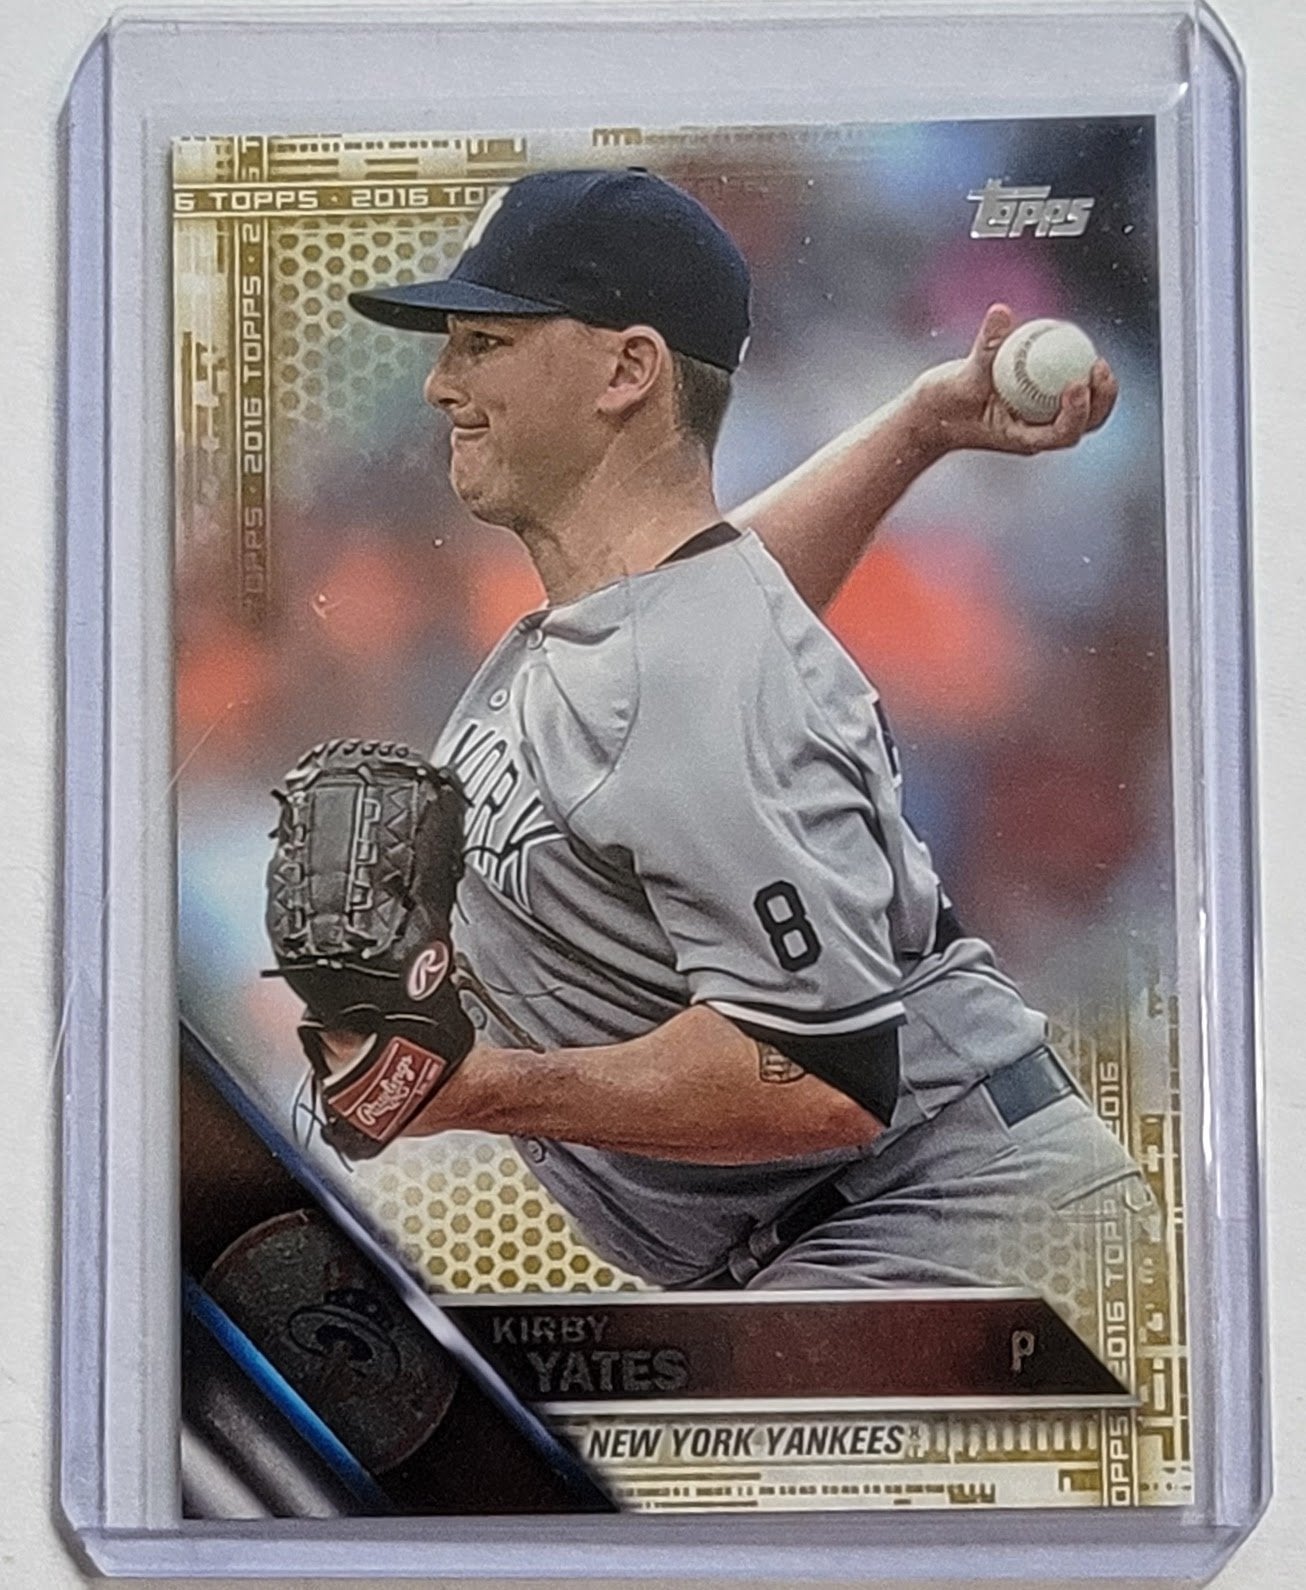 2016 Topps Kirby Yates Gold #'d/2016 Parallel Baseball Card TPTV simple Xclusive Collectibles   